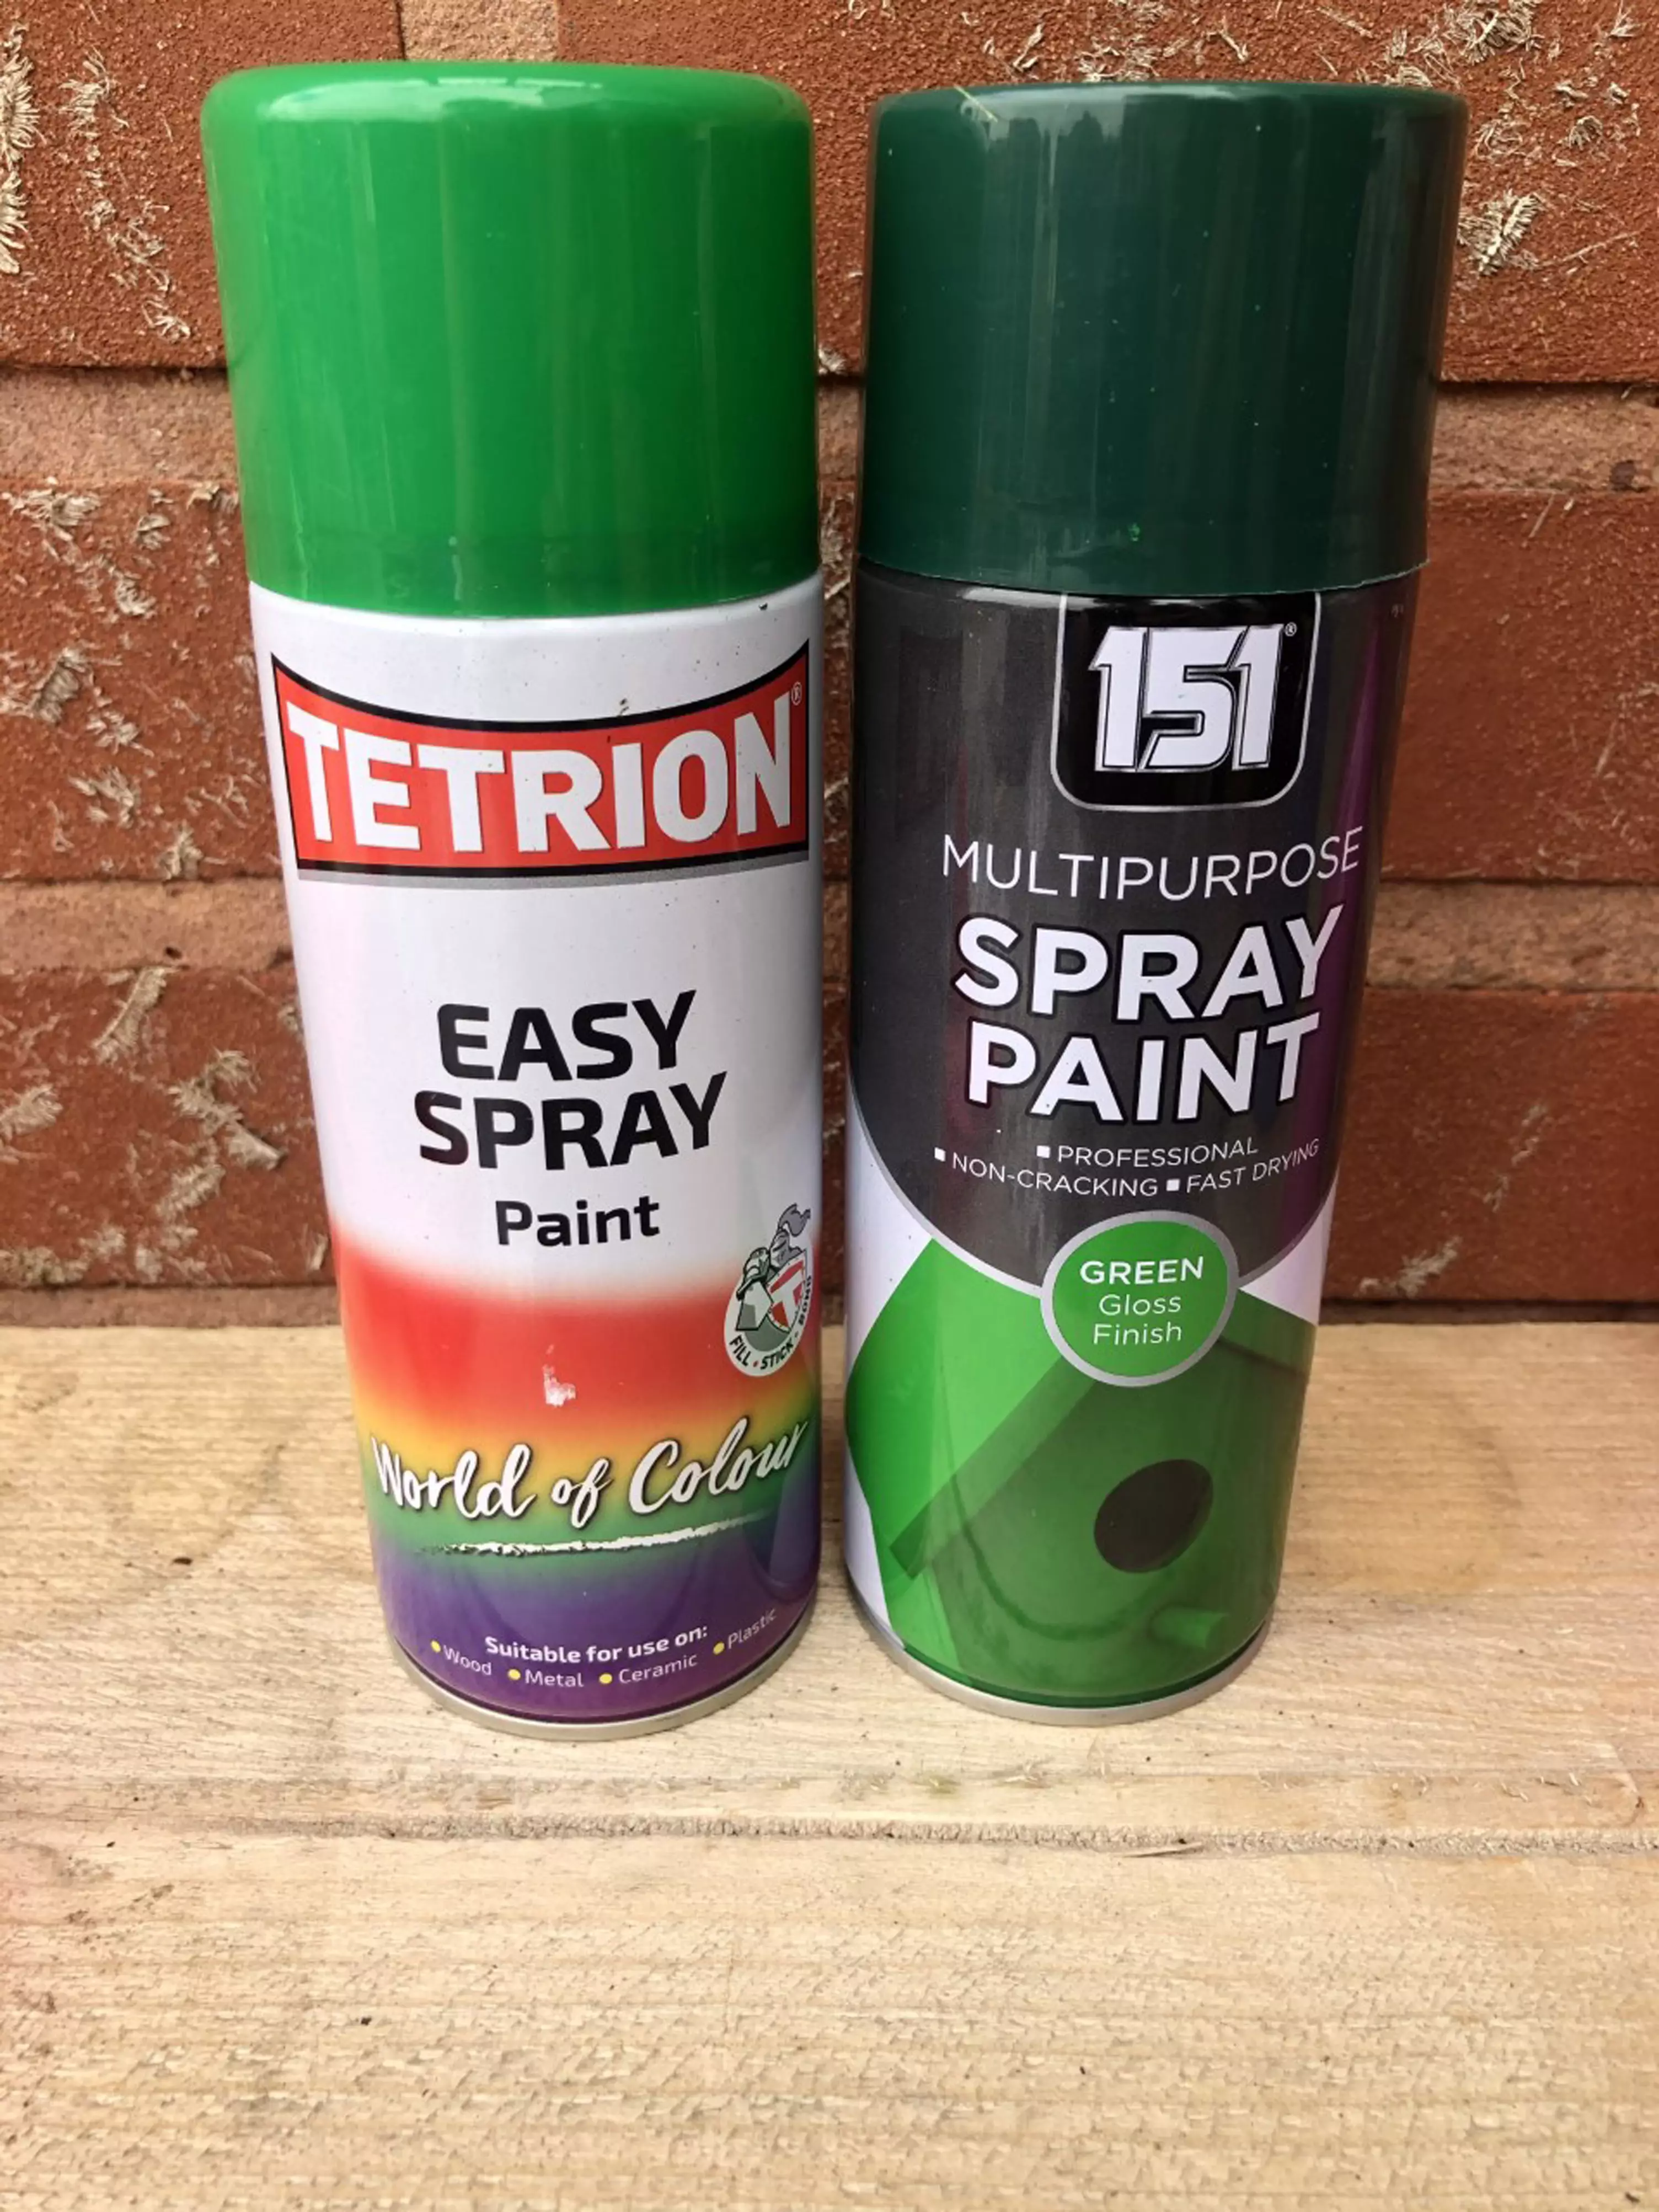 Gail picked up spray paint for just £3.99 (